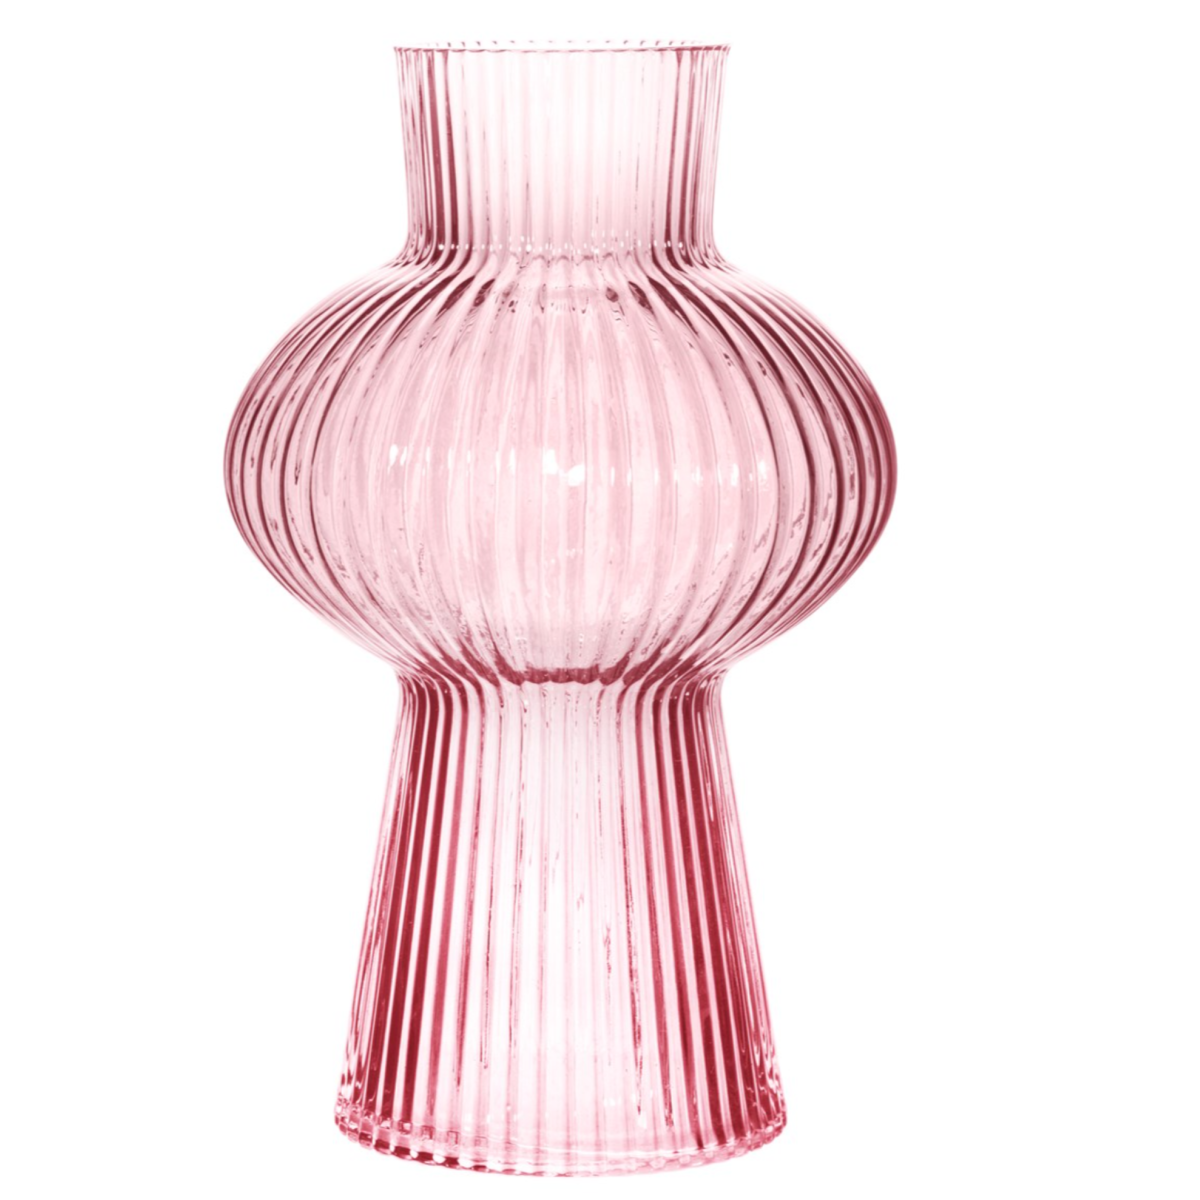 Shapely Fluted Glass Vase pink